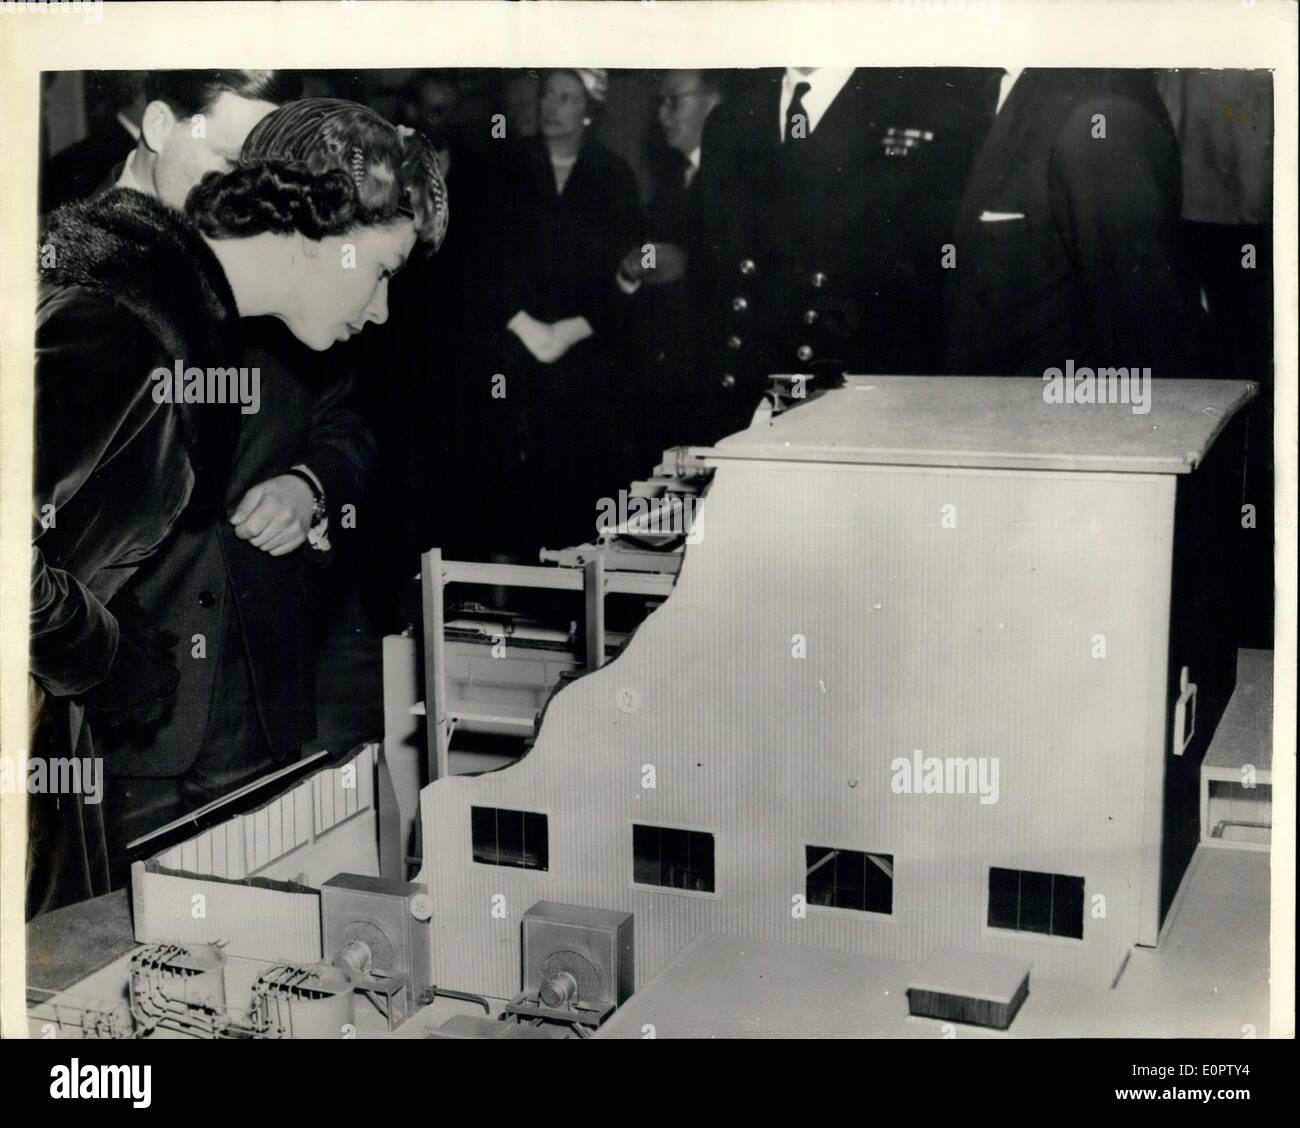 Mar. 01, 1957 - H.M. The Queen Pays Visit To Harwell... Research Reactor Model. H.M. The Queen and the Duke Edinburgh paid a visit to the Atomic Energy Research Establishment at Harwell, Herks, today where they saw the latest developments into research by British scientists into the Industrial application of nuclear power.. Keystone Photo Show:- H.M. The Queen looks at a site model of the Research reactor Lido during the visit to Harwell today. Stock Photo